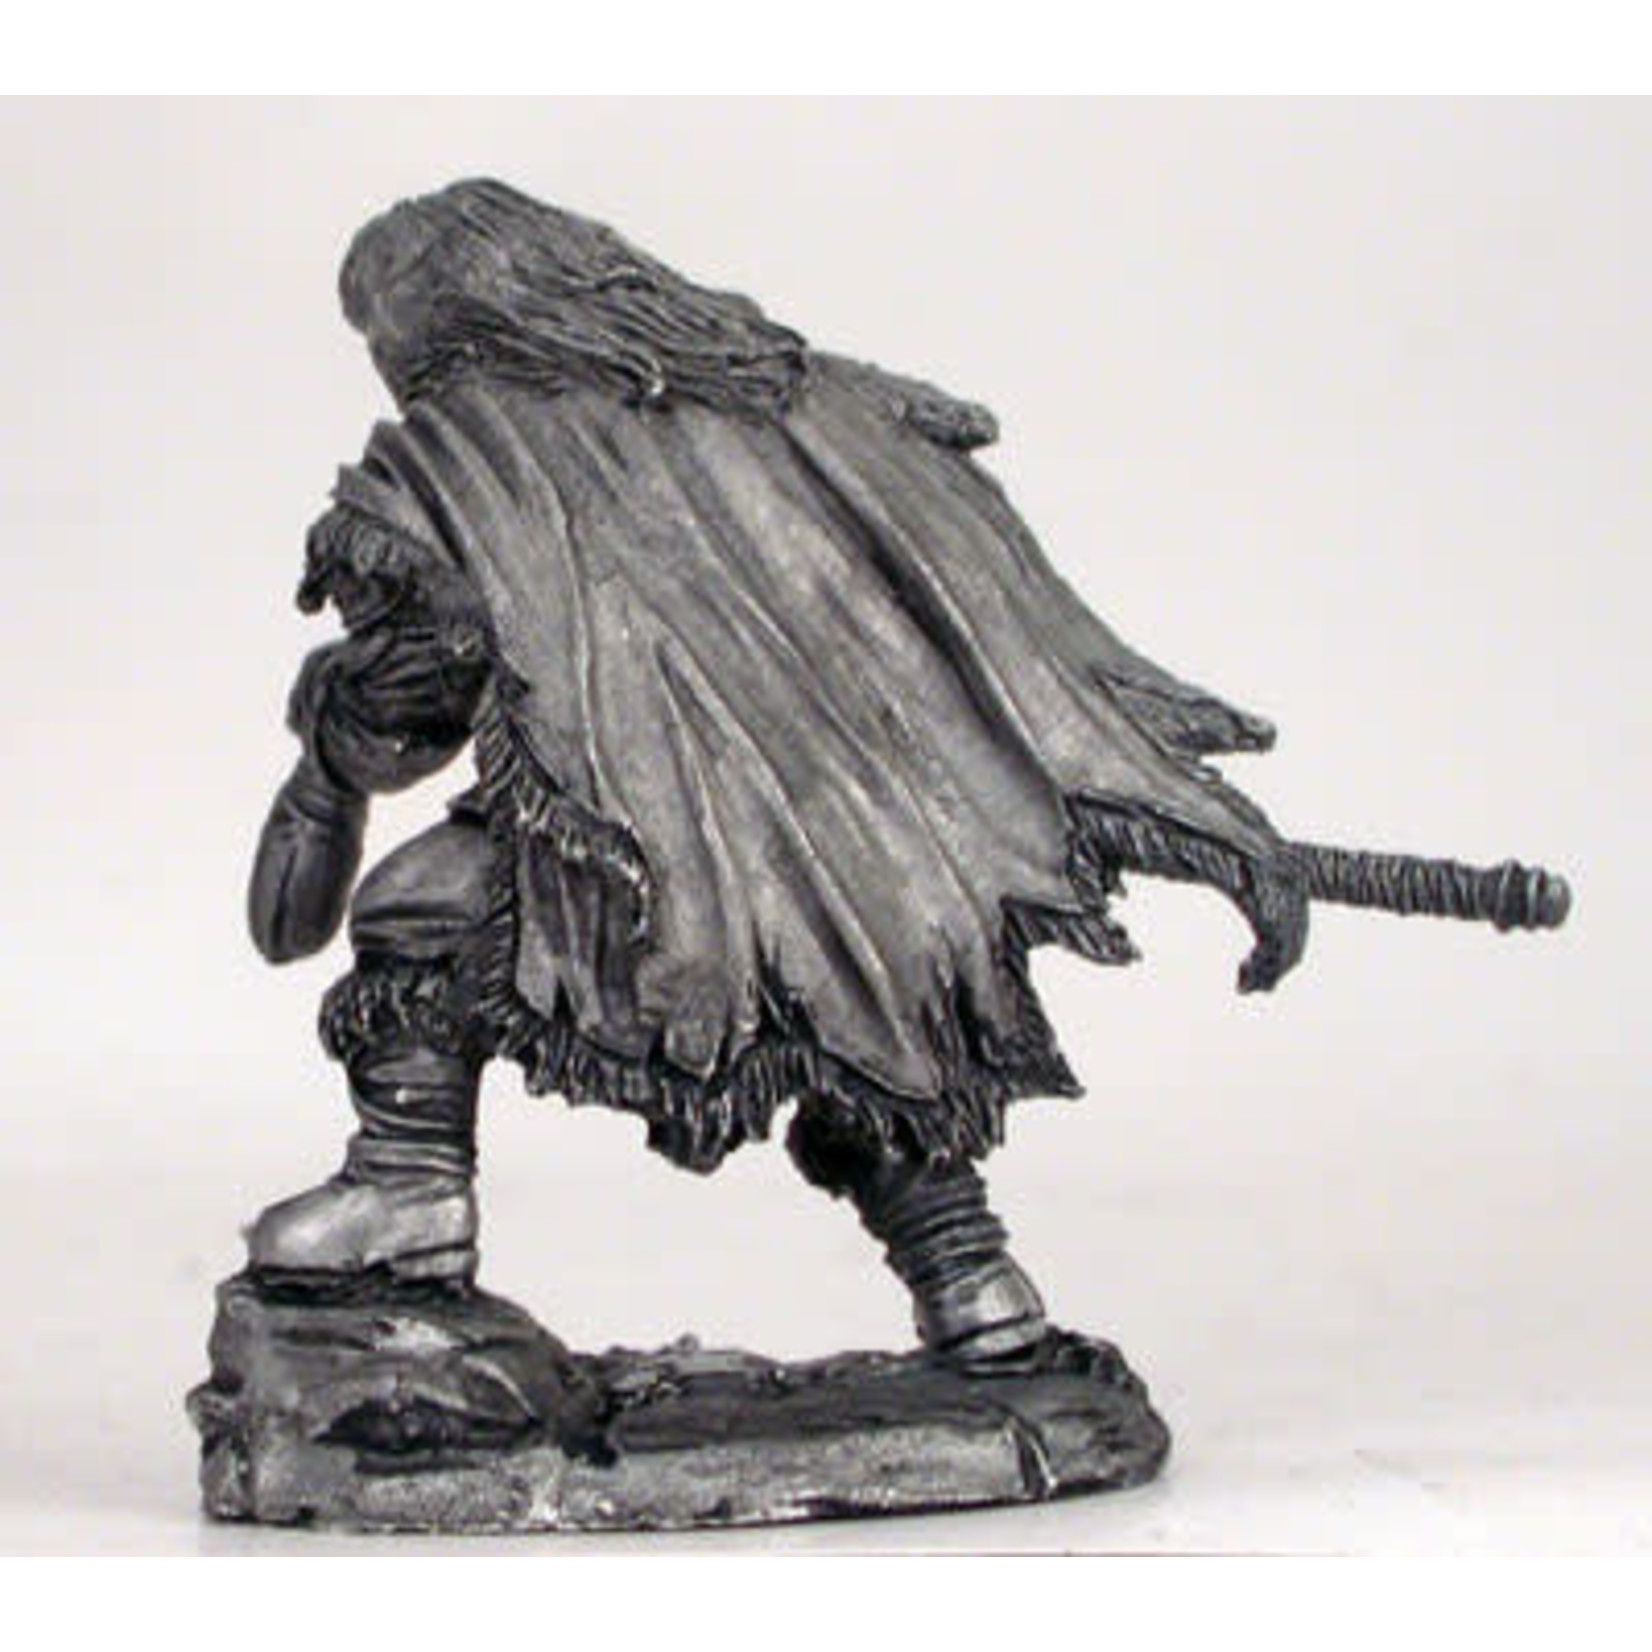 Dark Sword Miniatures Dark Sword Miniatures (Metal) Male Dwarven Fighter with Axe and Wine Skin (1)